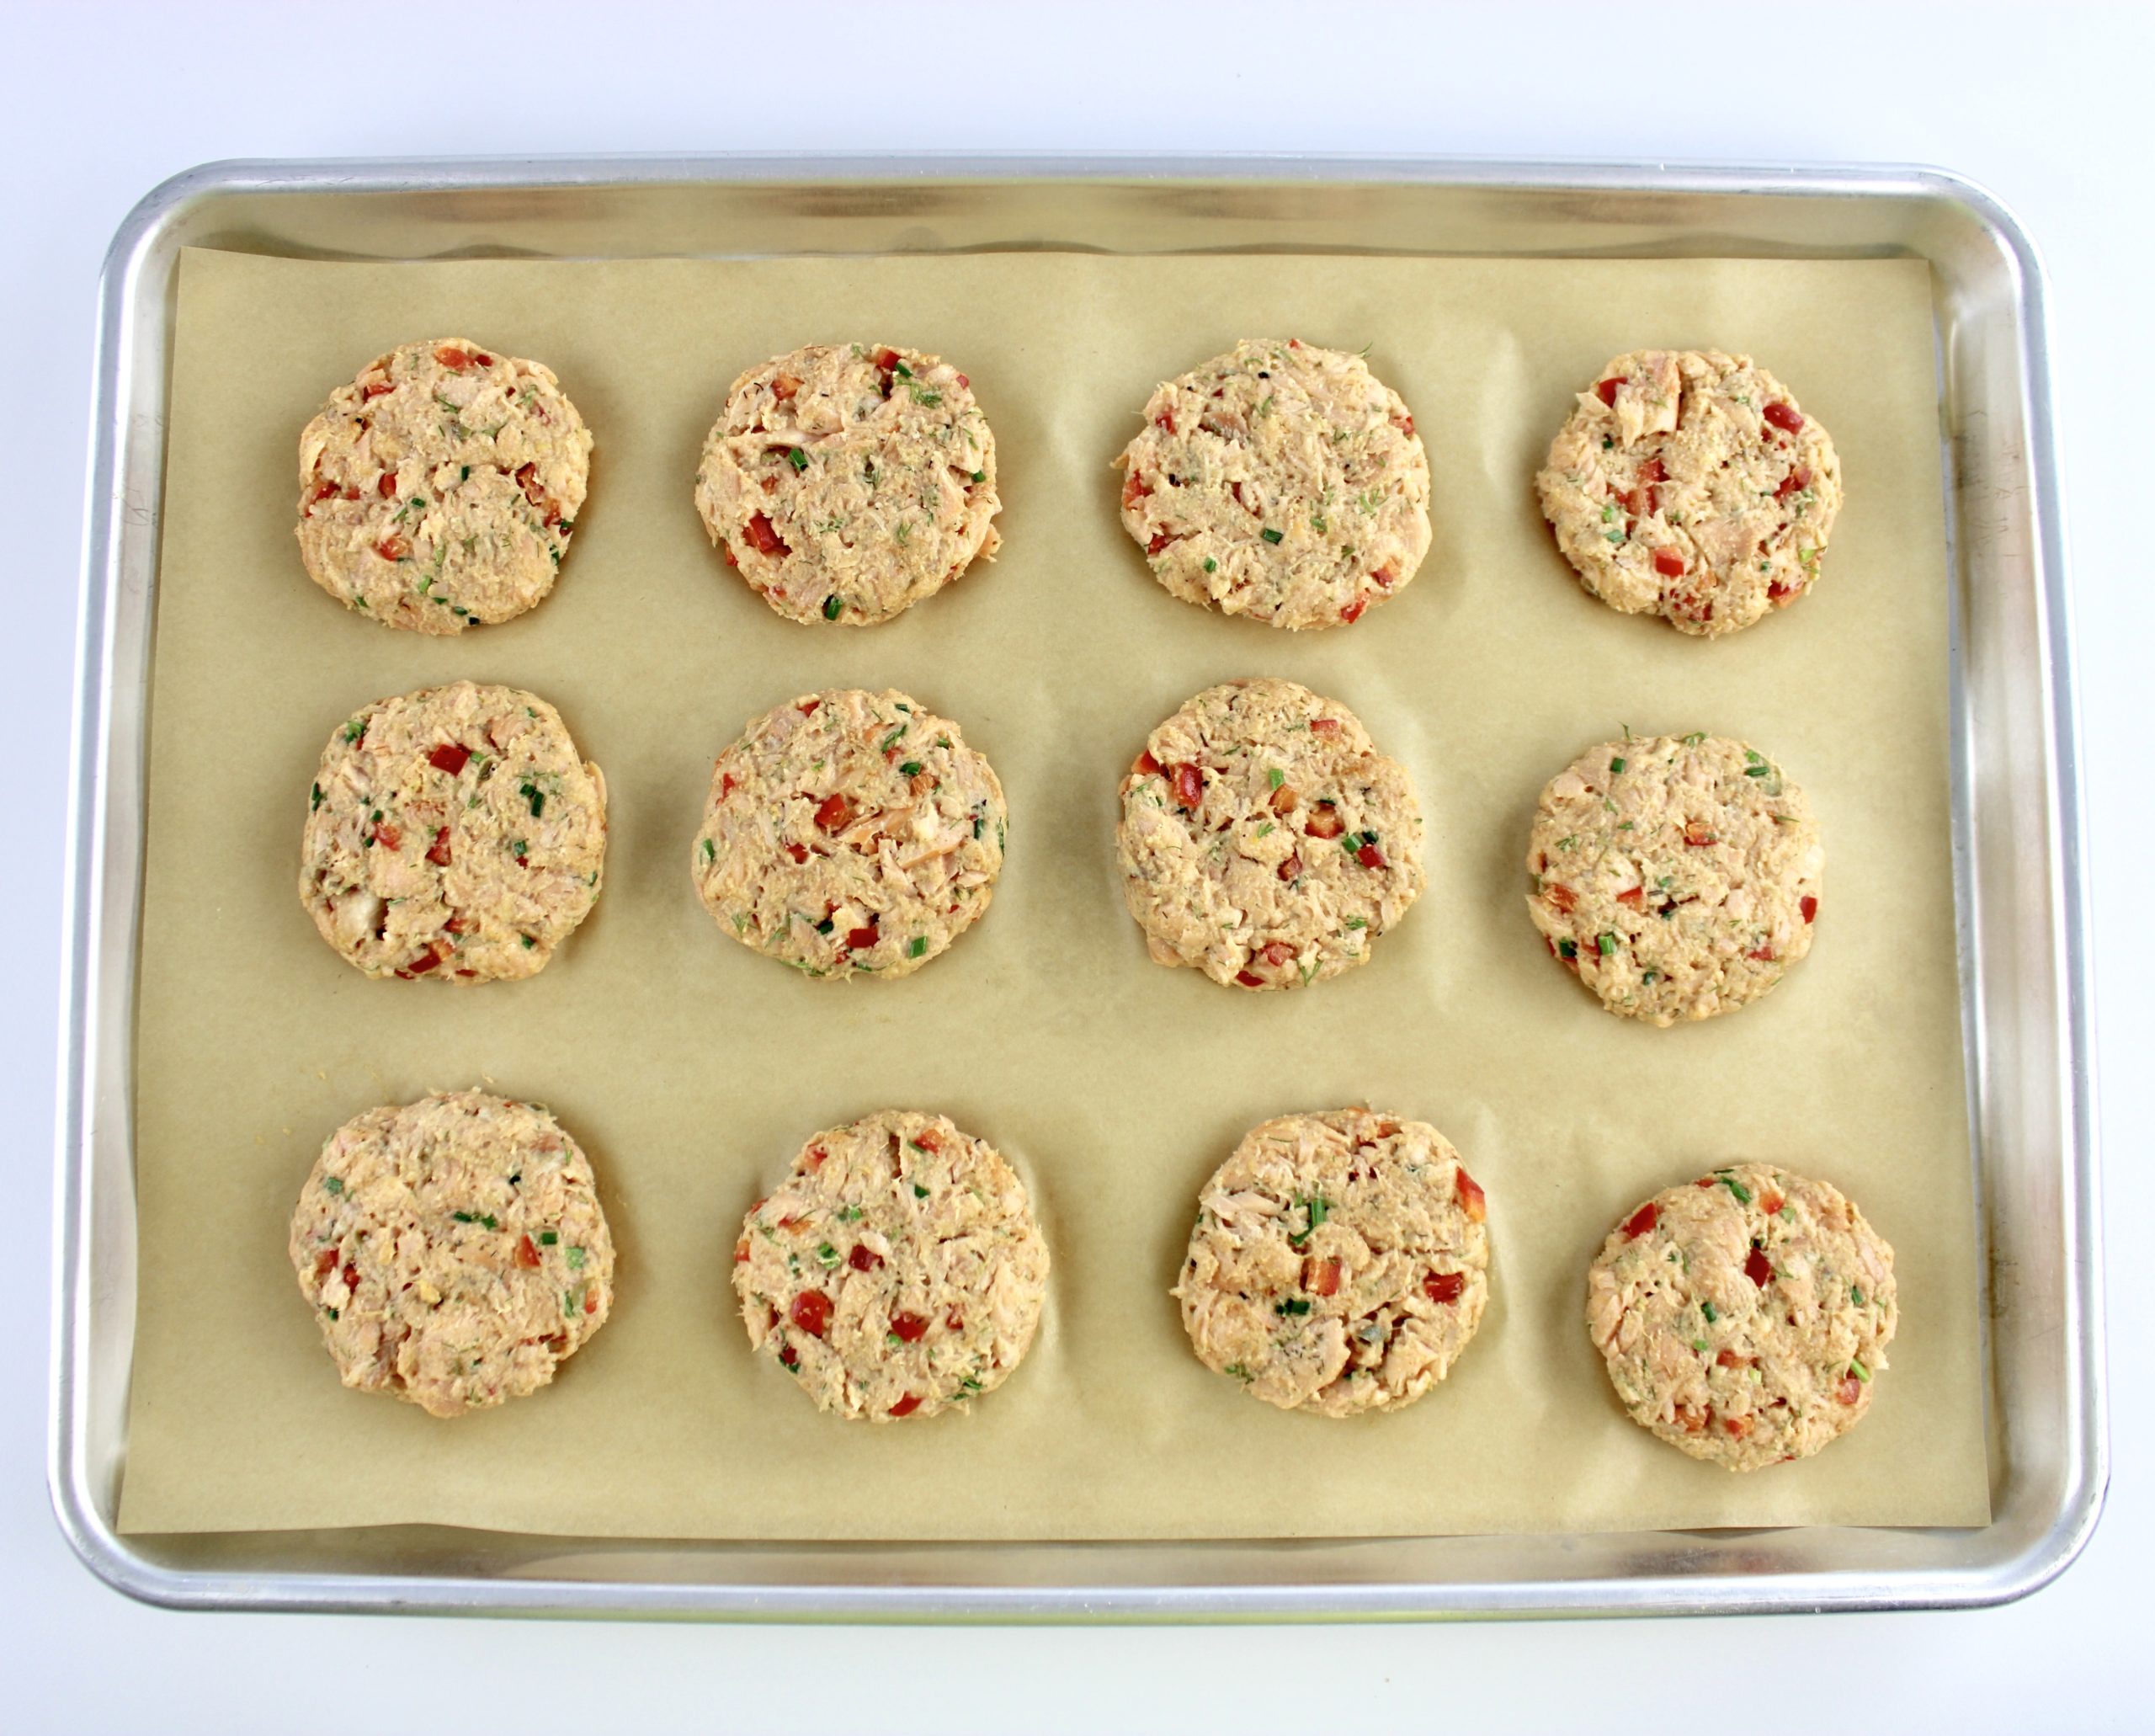 12 salmon patties on parchment lined baking sheet